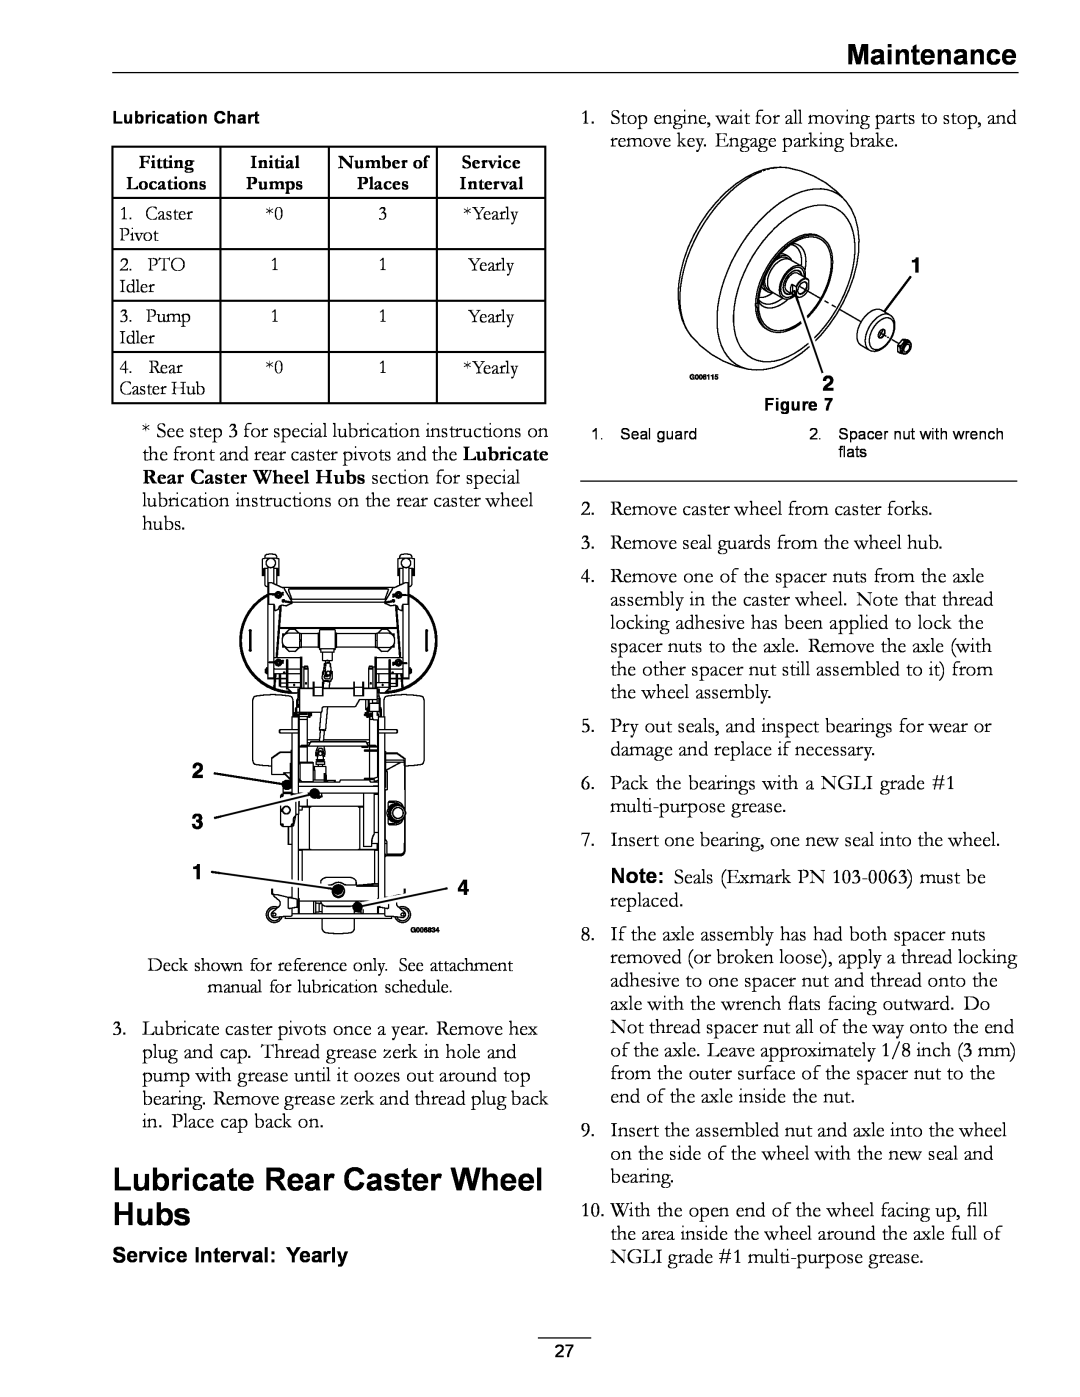 Exmark 850 manual Lubricate Rear Caster Wheel Hubs, Service Interval Yearly, Maintenance 